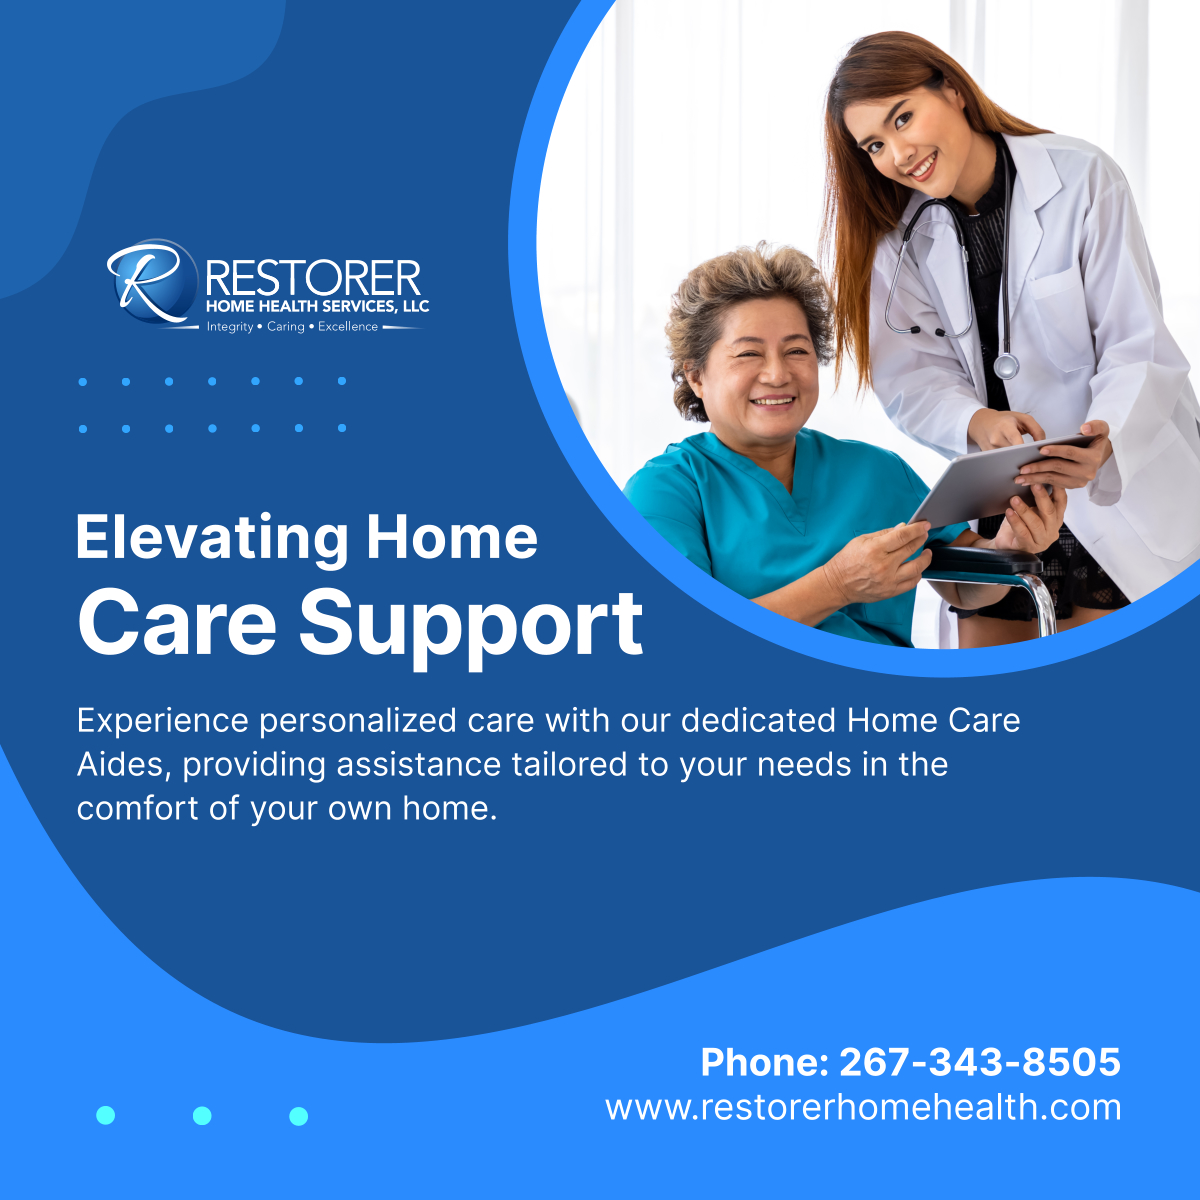 Discover personalized care with our dedicated Home Care Aides. Experience comfort and independence at home. Contact us today. 

#HomeCare #HomeHealthcare #PhiladelphiaPA